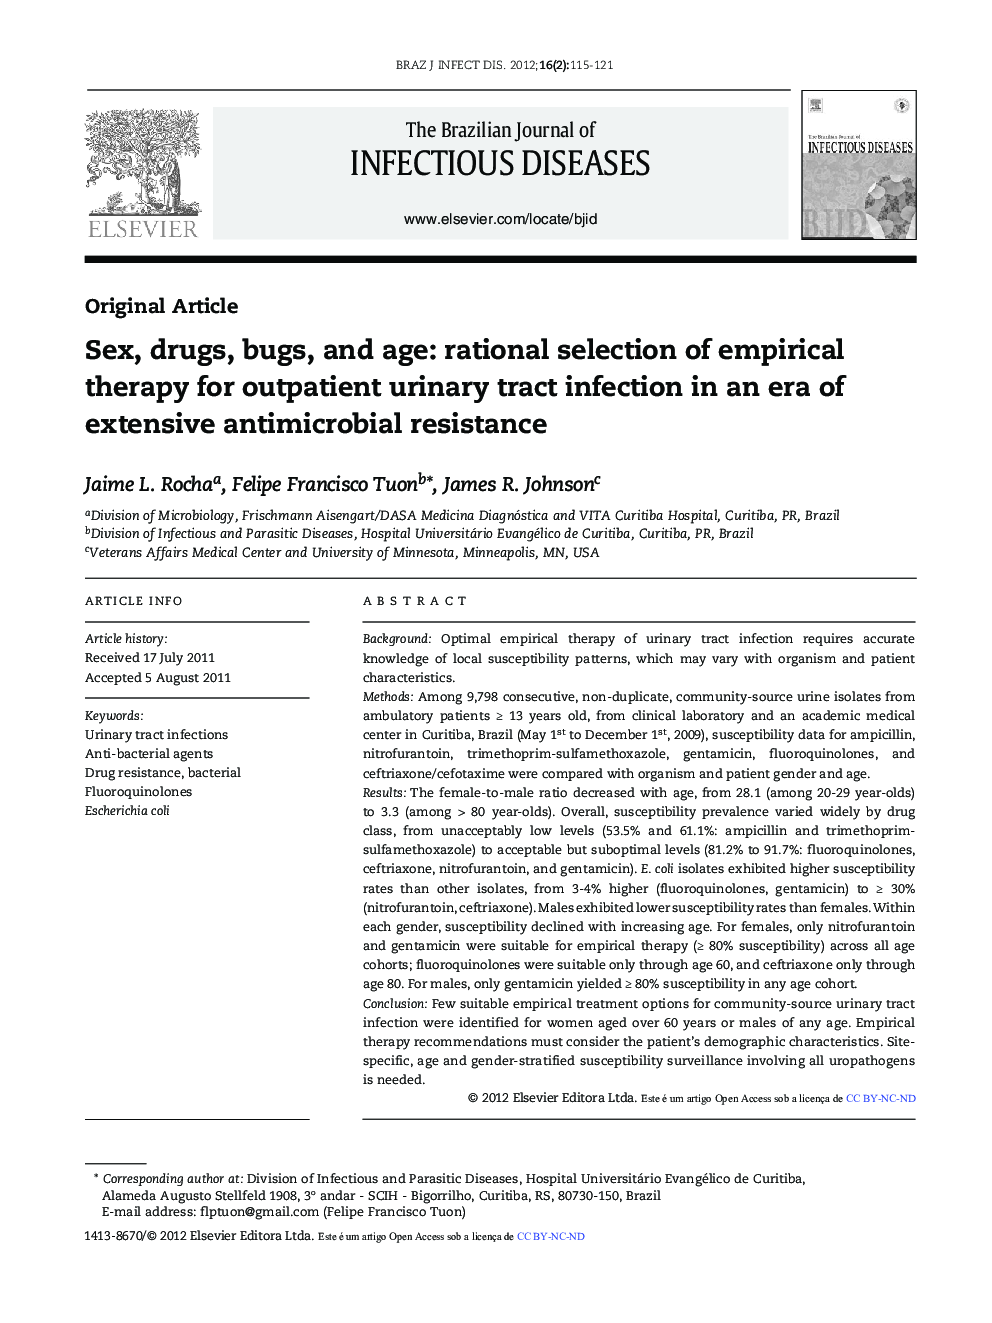 Sex, drugs, bugs, and age: Rational selection of empirical therapy for outpatient urinary tract infection in an era of extensive antimicrobial resistance